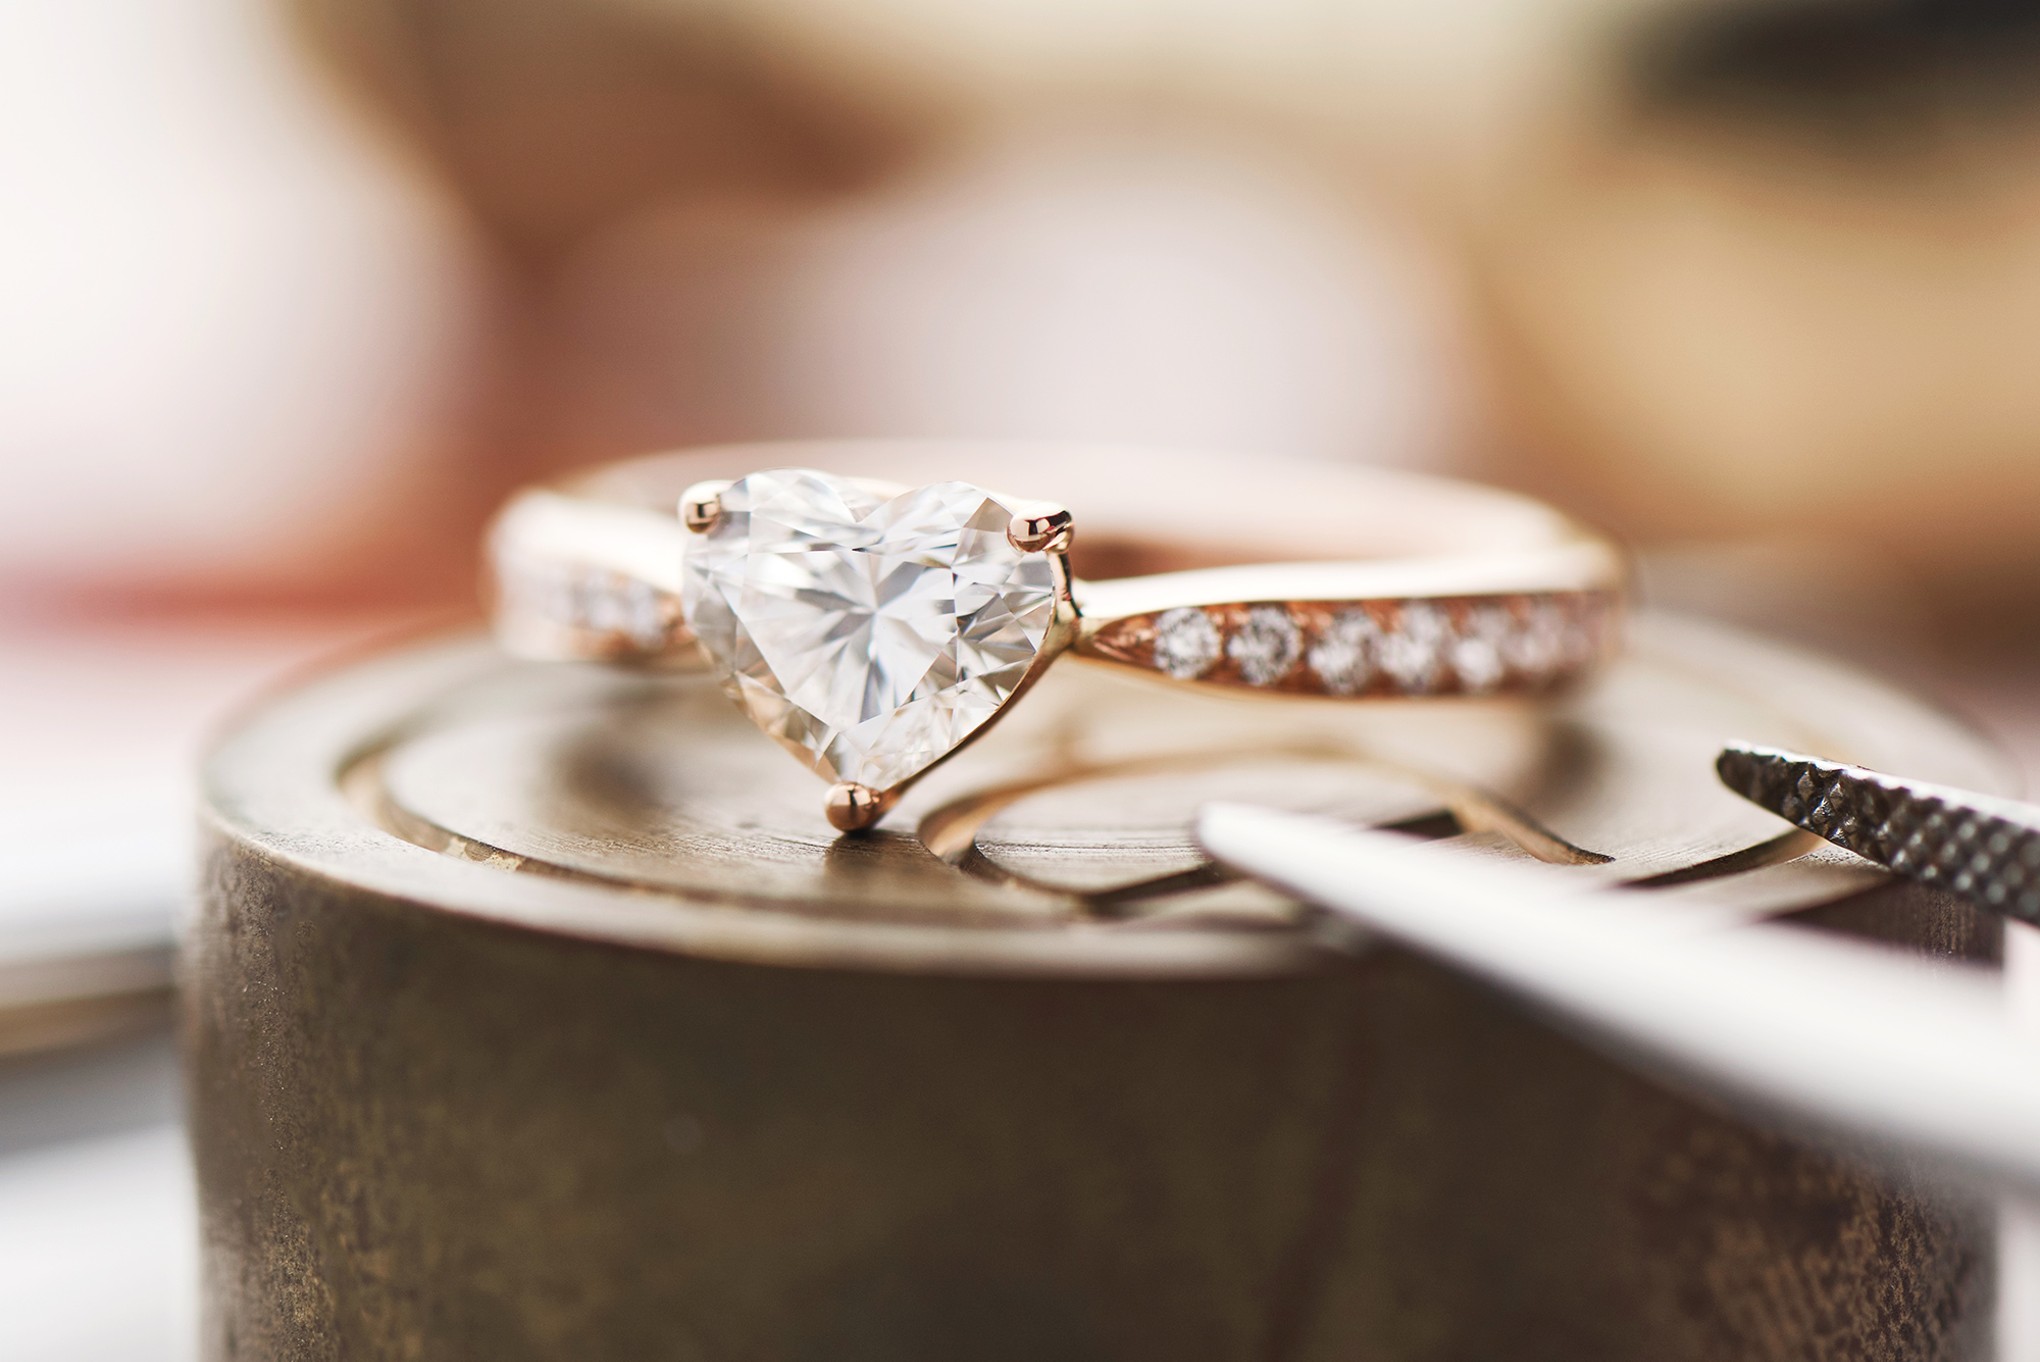 What The Aspects That Makes A Simple Ring To An Engagement Ring